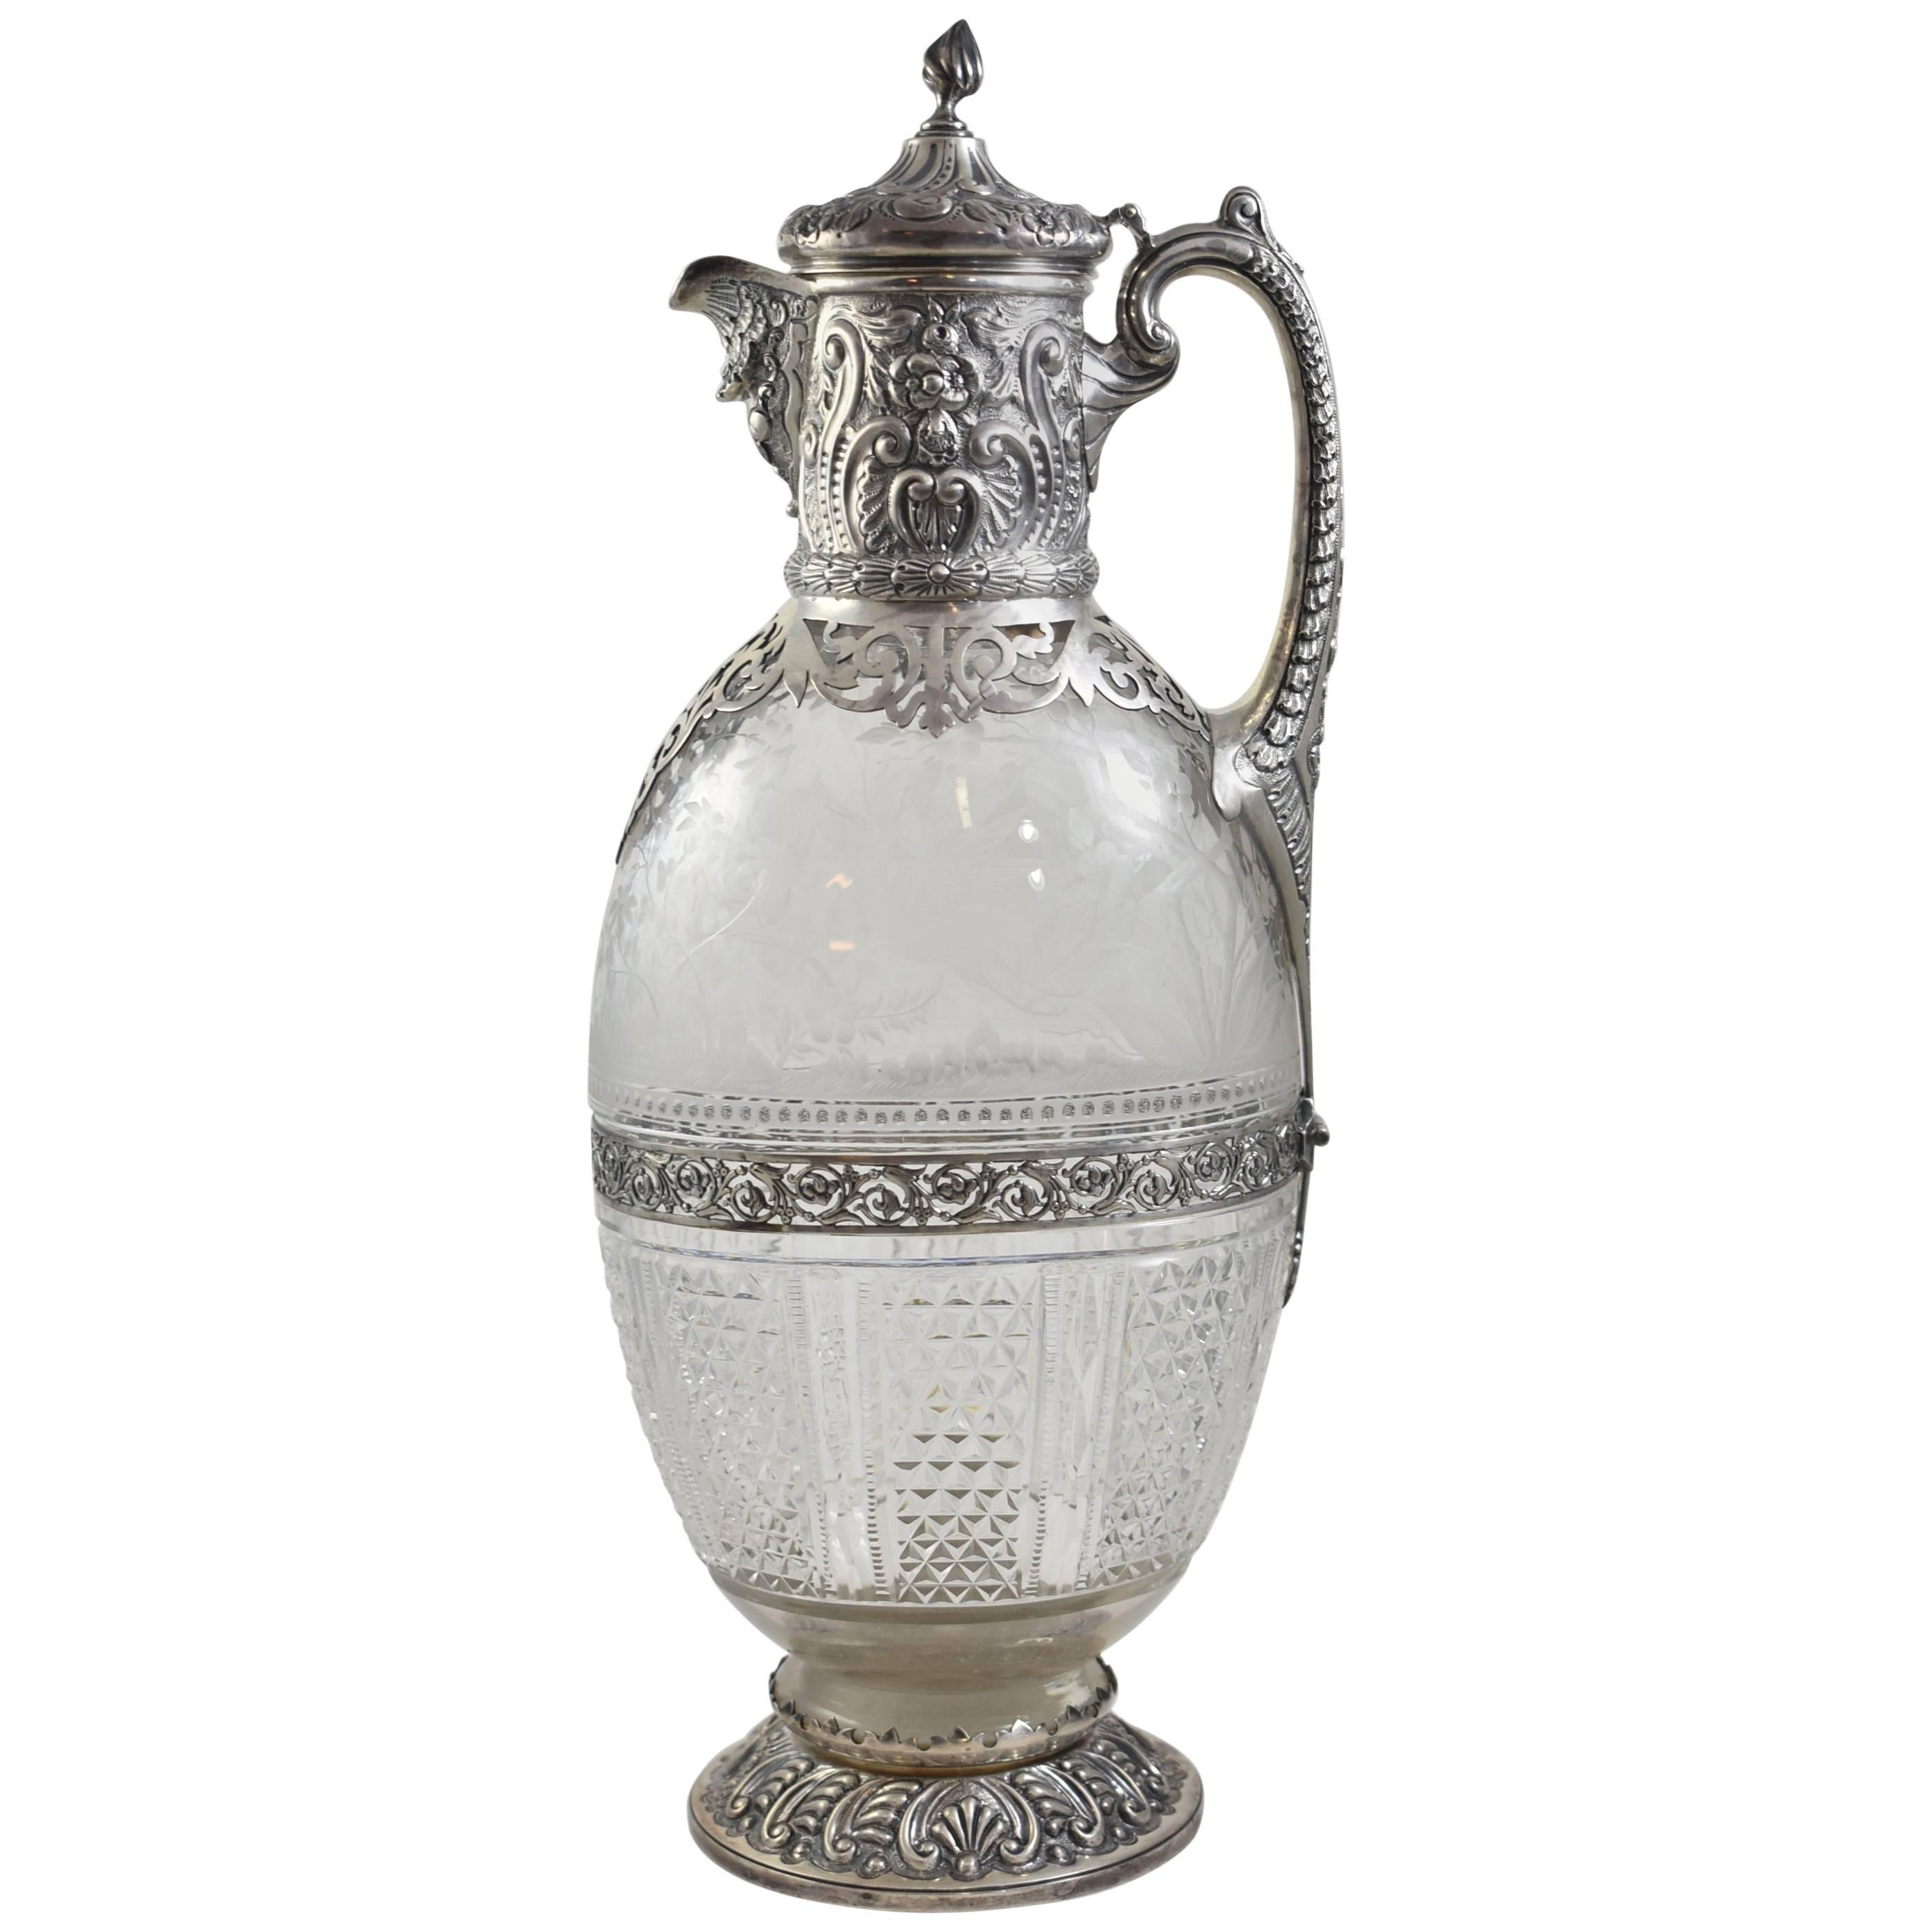 19th Century Sterling Silver and Etched Glass Pitcher by George Elder